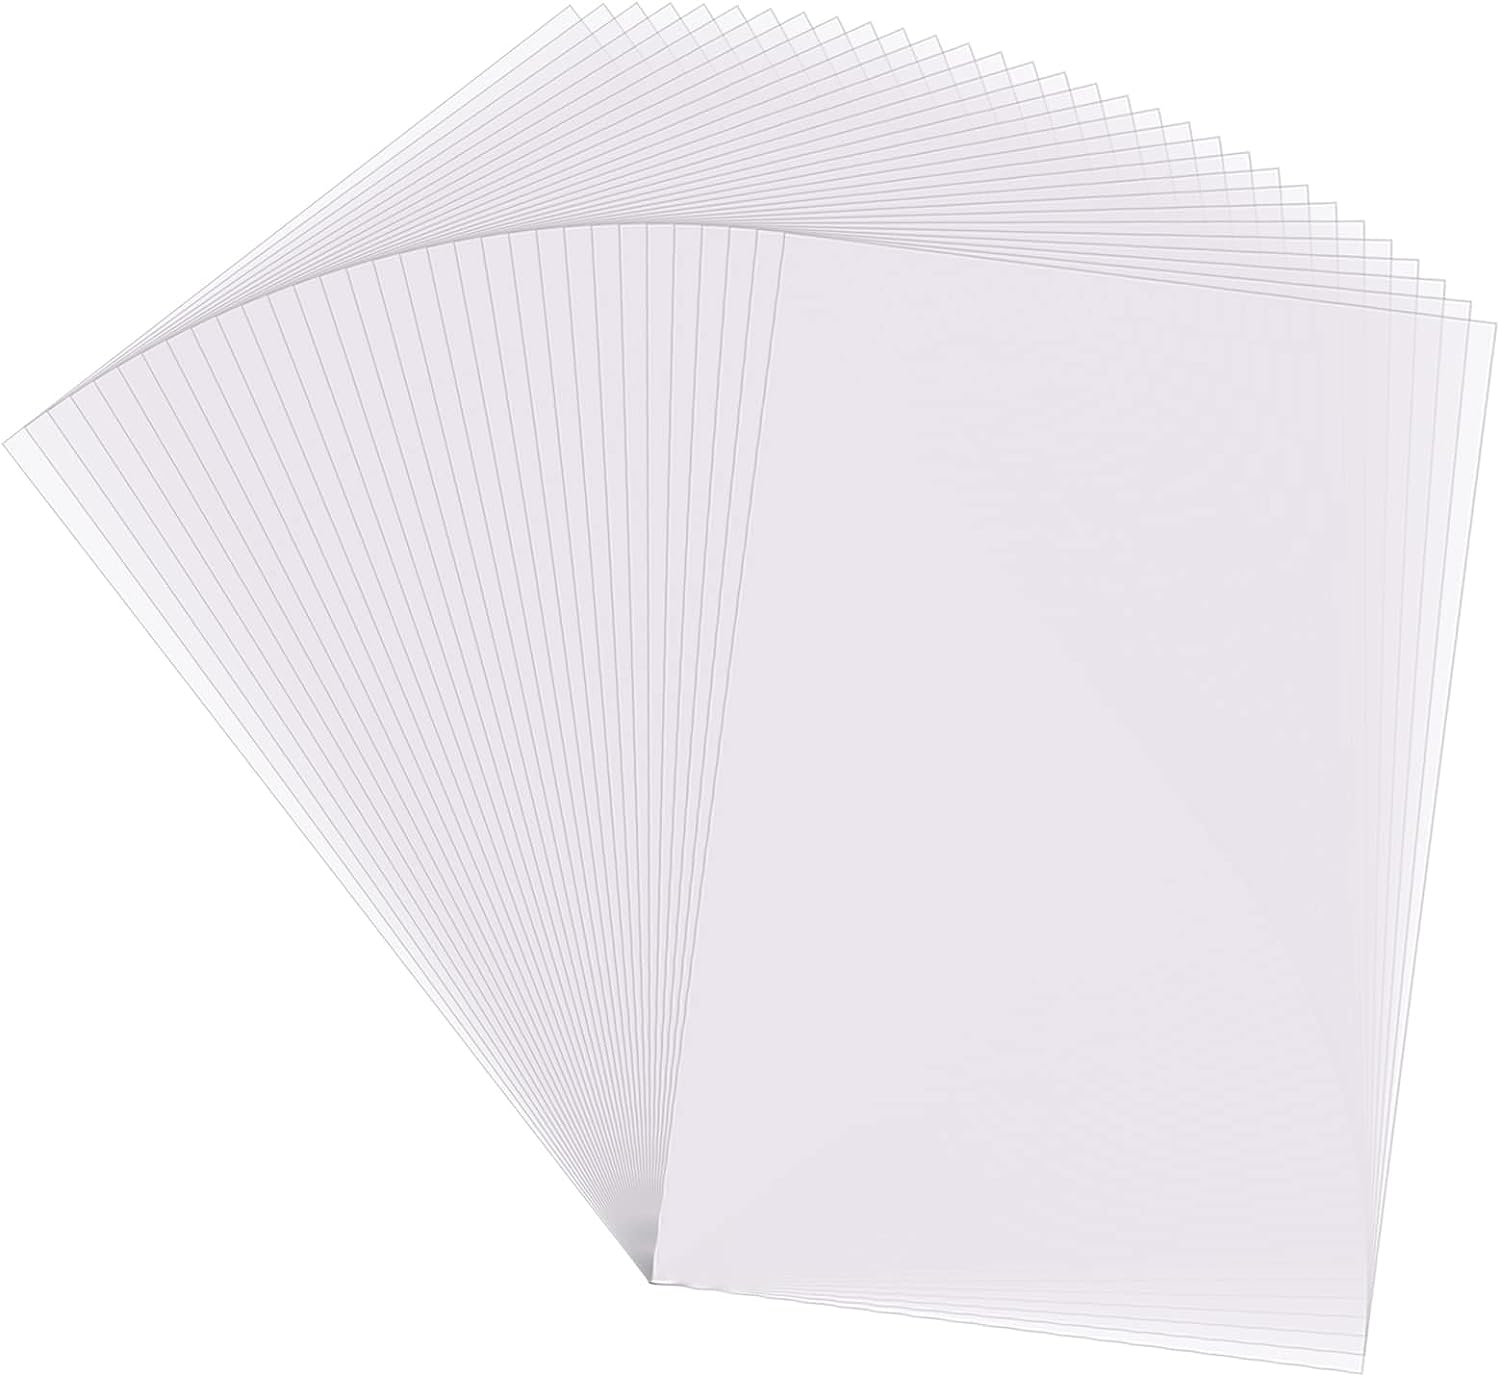 100 Sheets Tracing Paper, 8.5 x 11 inches Artists [...]